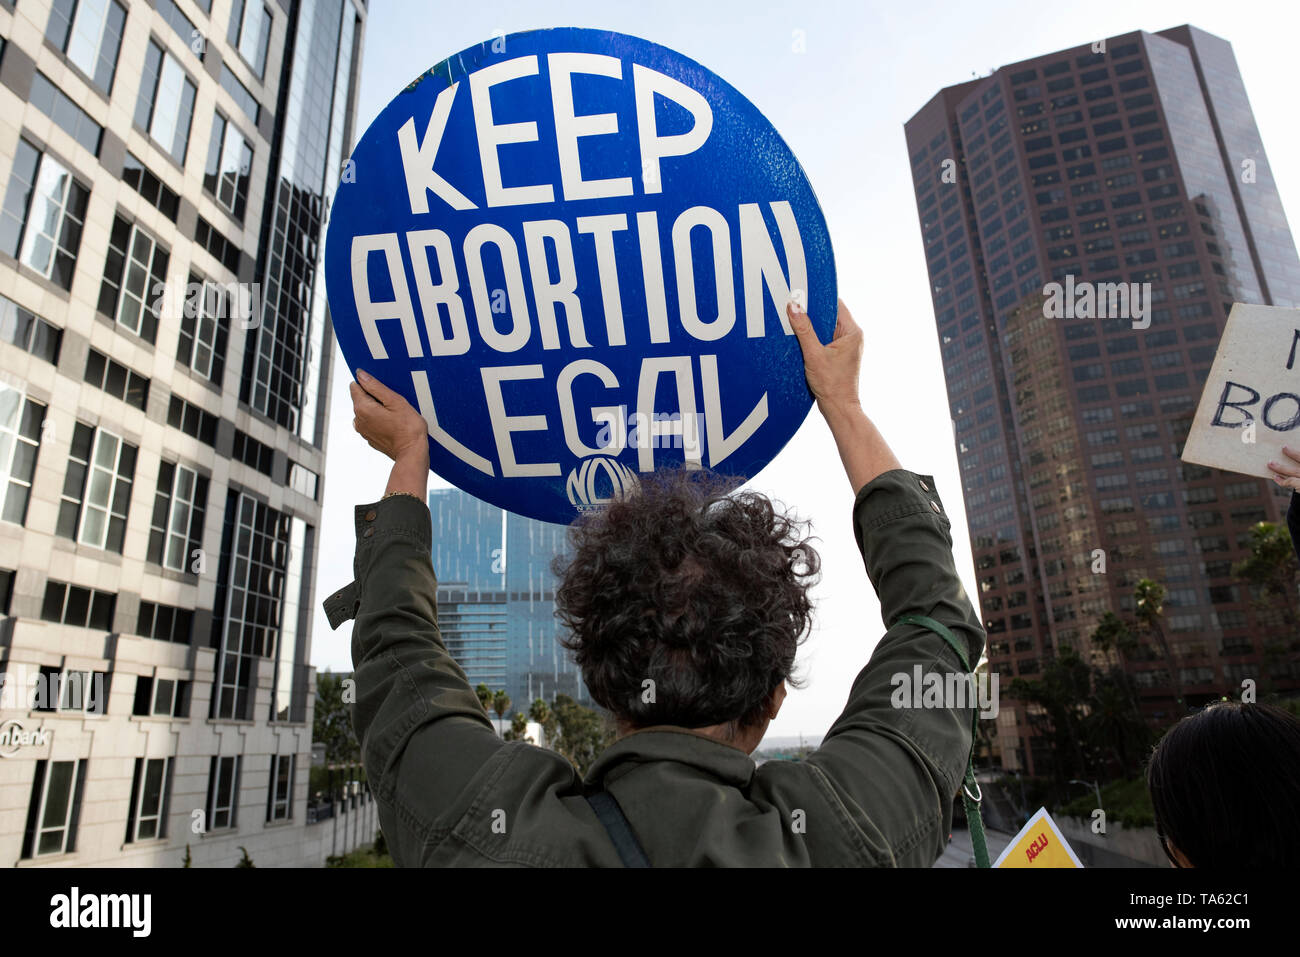 An activist seen holding a placard that says Keep Abortion Legal during the protest. Women rights activists protested against restrictions on abortions after Alabama passed the most restrictive abortion bans in the US. Similar Stop the Bans Day of Action for Abortion Rights rallies were held across the nation. Stock Photo